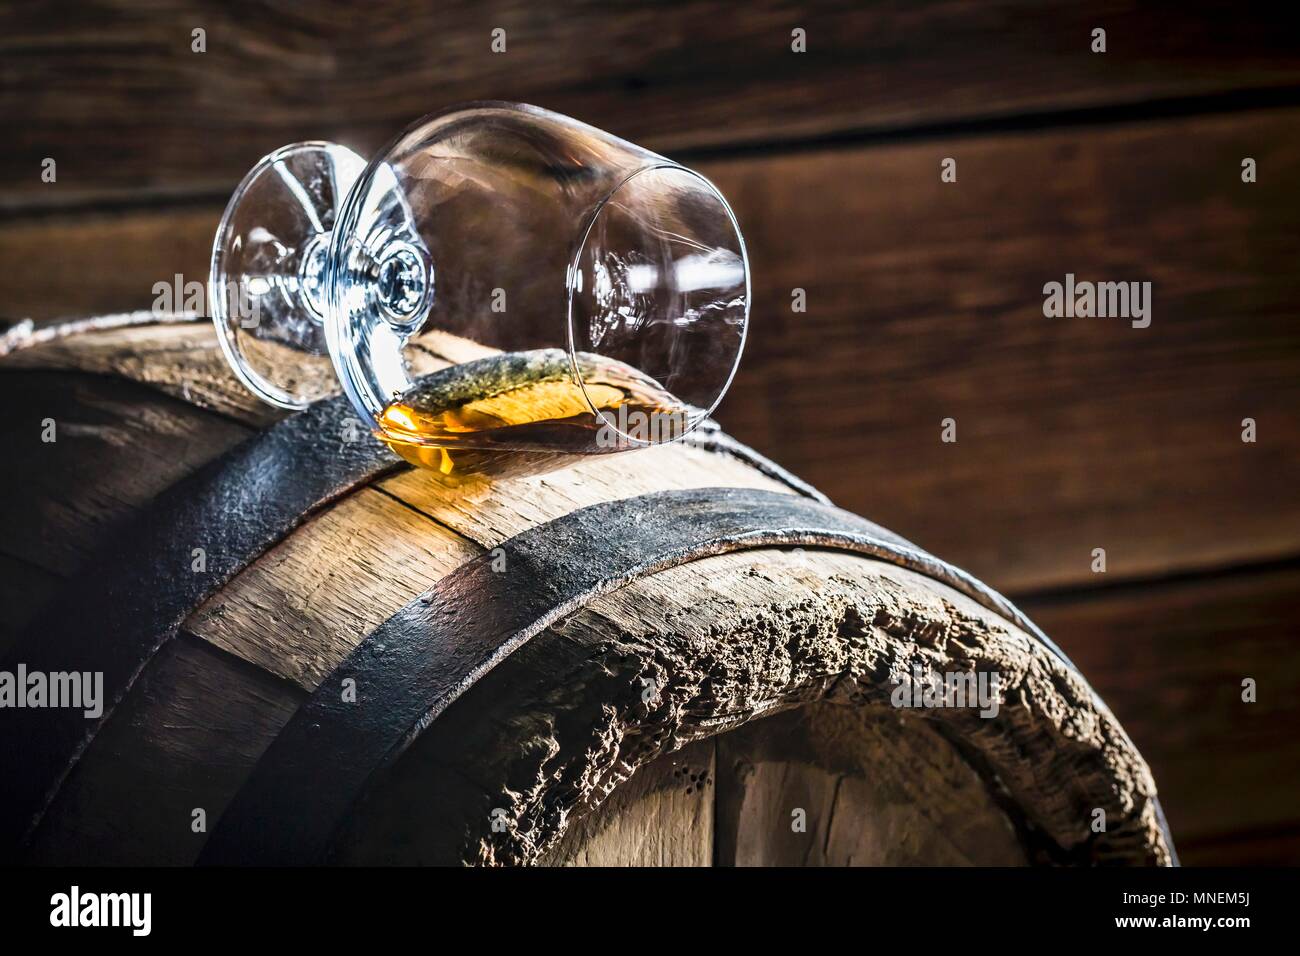 A overturned glass of cognac on an old wooden barrel Stock Photo